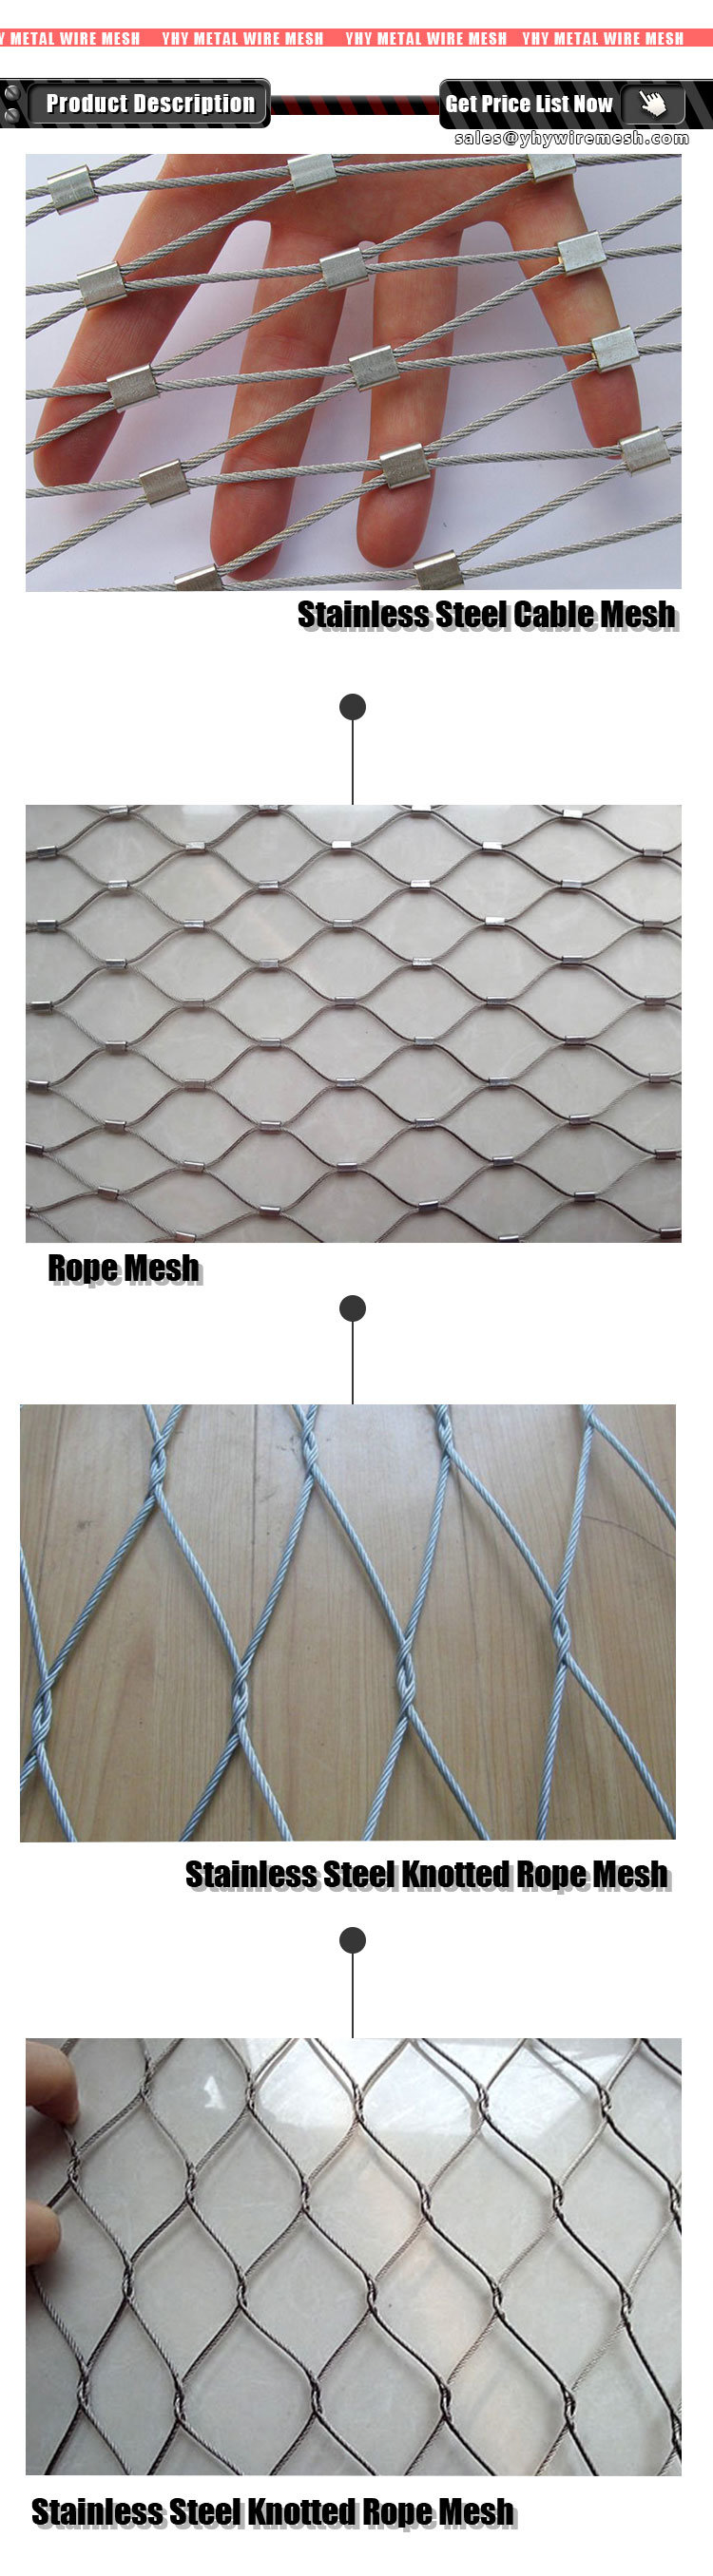 316 Stainless Steel Cable Knotted Mesh